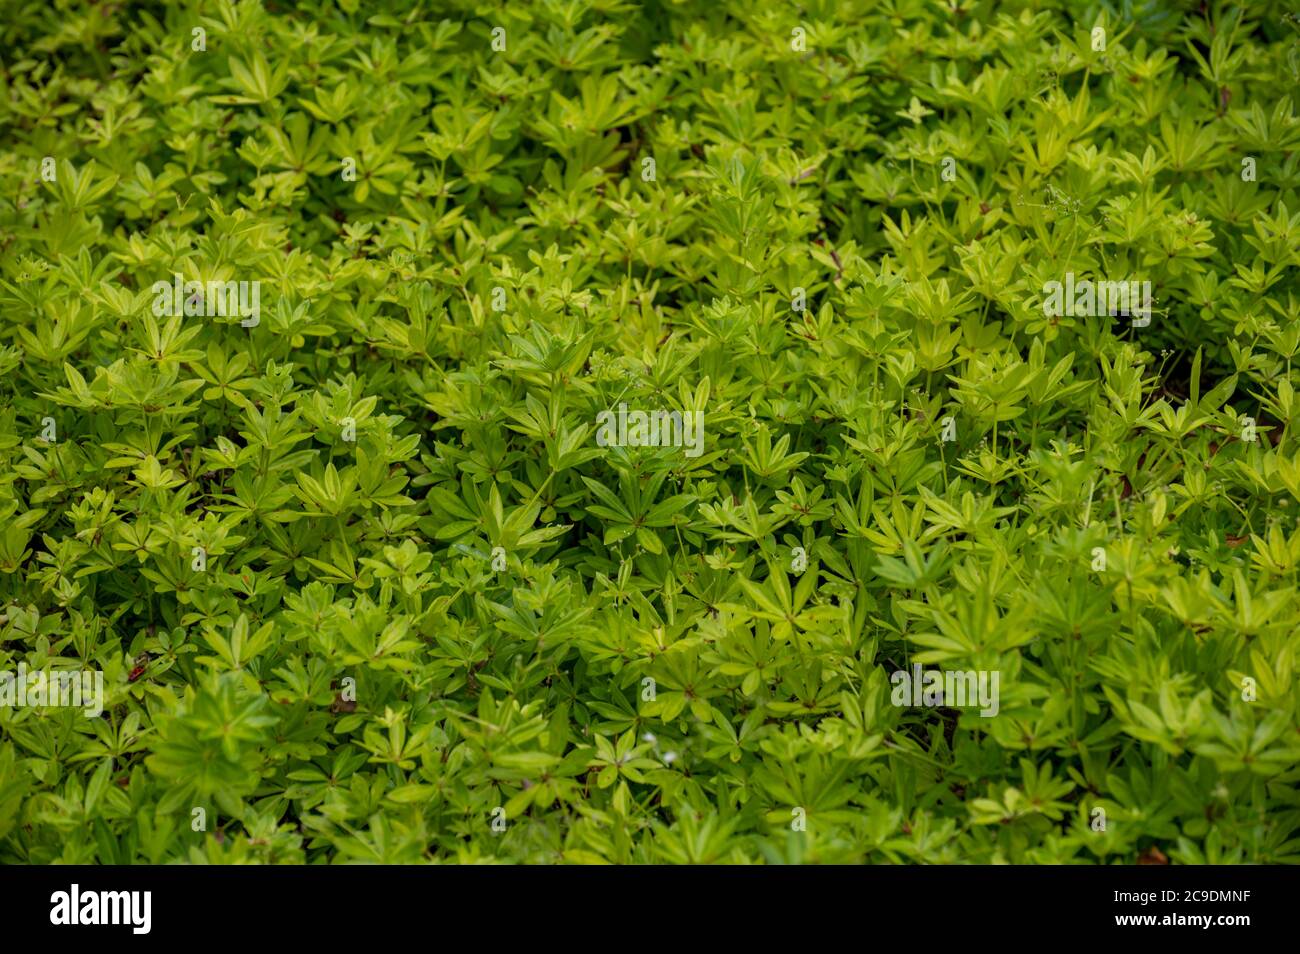 Botanical collection of medicinal plants and edible herbs, Asperula or Galium odoratum or sweetscented bedstraw plant in summer Stock Photo